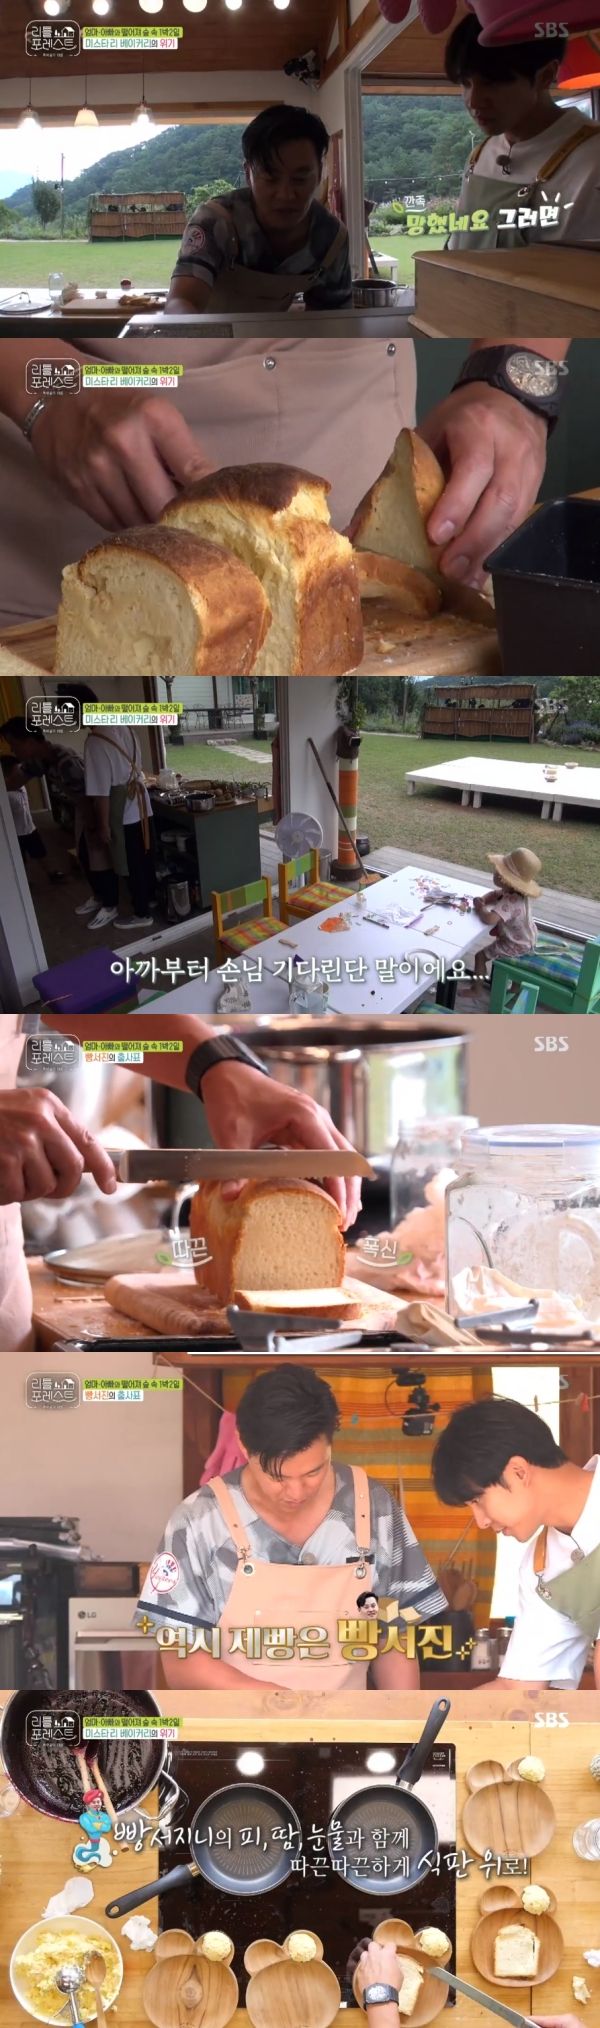 Lee Seo-jin was embarrassed by the scuffling dough in the baked bread.SBS Little Forest broadcast on the 16th featured Lee Seo-jin, who challenged baking.Lee Seo-jin started baking bread to use Space Jam made by Little and Lee Seung-gi.Lee Seo-jin, in the expectation of Littles, took the bread out of the Oven; however, the baked bread was a different look than expected.Lee Seo-jin, who was cutting bread, looked into the doughy bread, saying, I was not in the middle.Seeing Lee Seung-gi, who puts the undercooked bread back into the Oven, said: Im sorry, brother, this shouldnt fail.Lee Seung-gi then saw the waiting Yihans attention.Lee Seung-gi, who is expecting Lee Han, said, It is not what you think of bread. It is an  Lizzy.Behind it, Lee Seo-jin pulled out the baked bread again, this time confirming it had been baked to the inside and satisfied, saying, Thats good.Then Lee Seung-gi laughed, turning his gaze to a real handmade Space Jam.